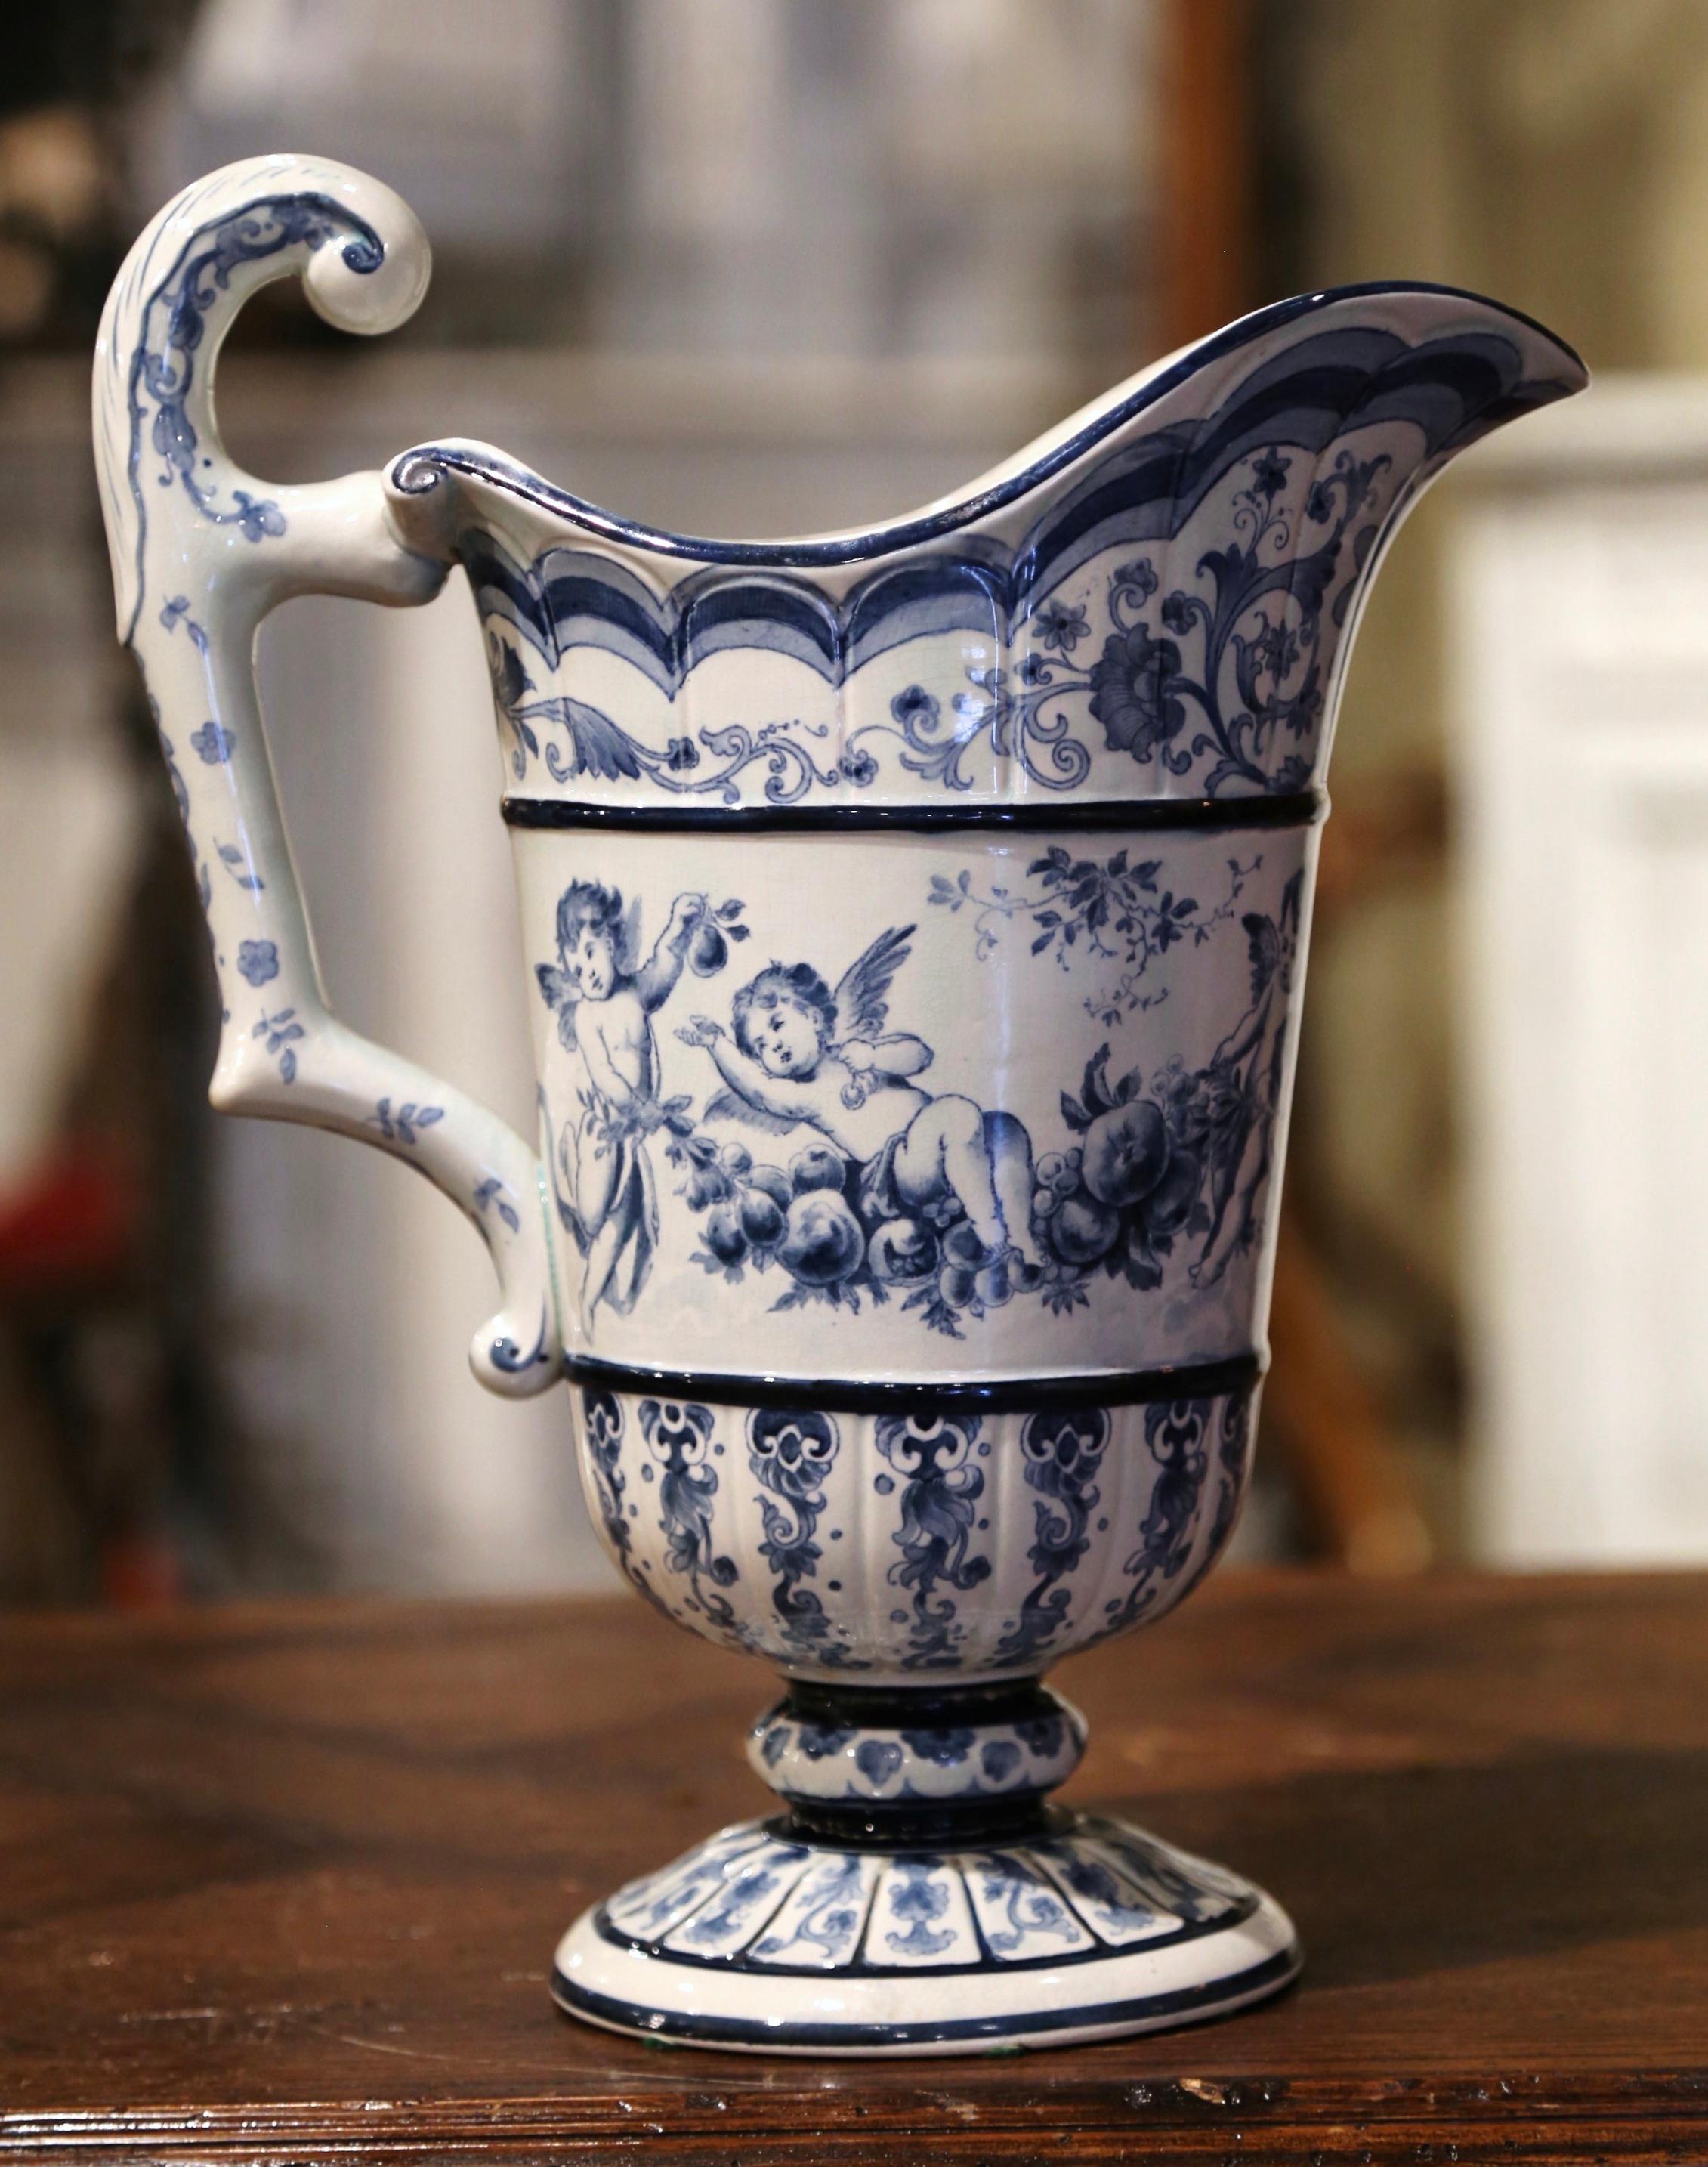 This elegant antique water pitcher was crafted in France, circa 1960. The carafe stands on a round base and is dressed with an elaborate side handle over a wide mouth and pour spout. The vase is decorated throughout with hand painted floral and